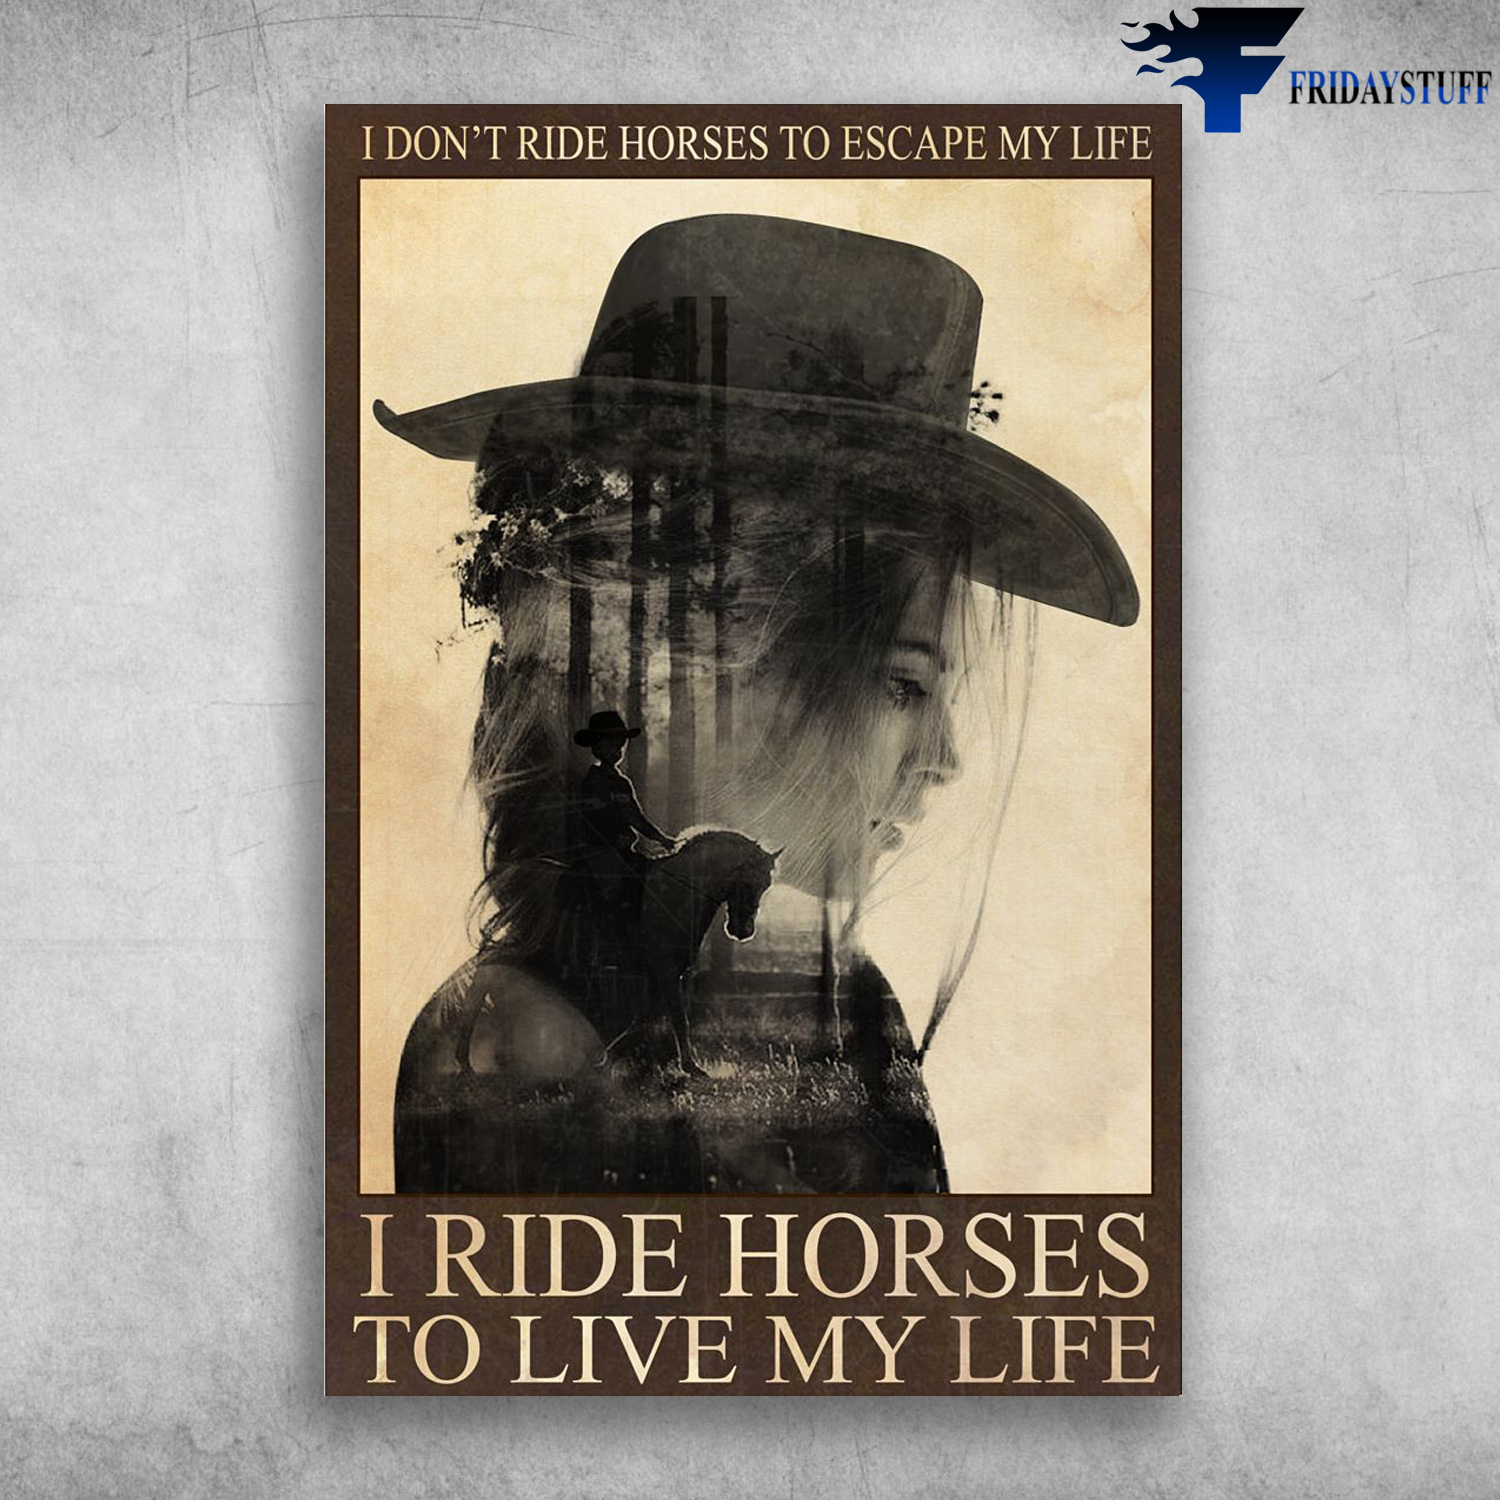 Cowgirl In The Horse - I Don't Ride Horses To Escape My Life, I Ride Horses To Live Ly Life